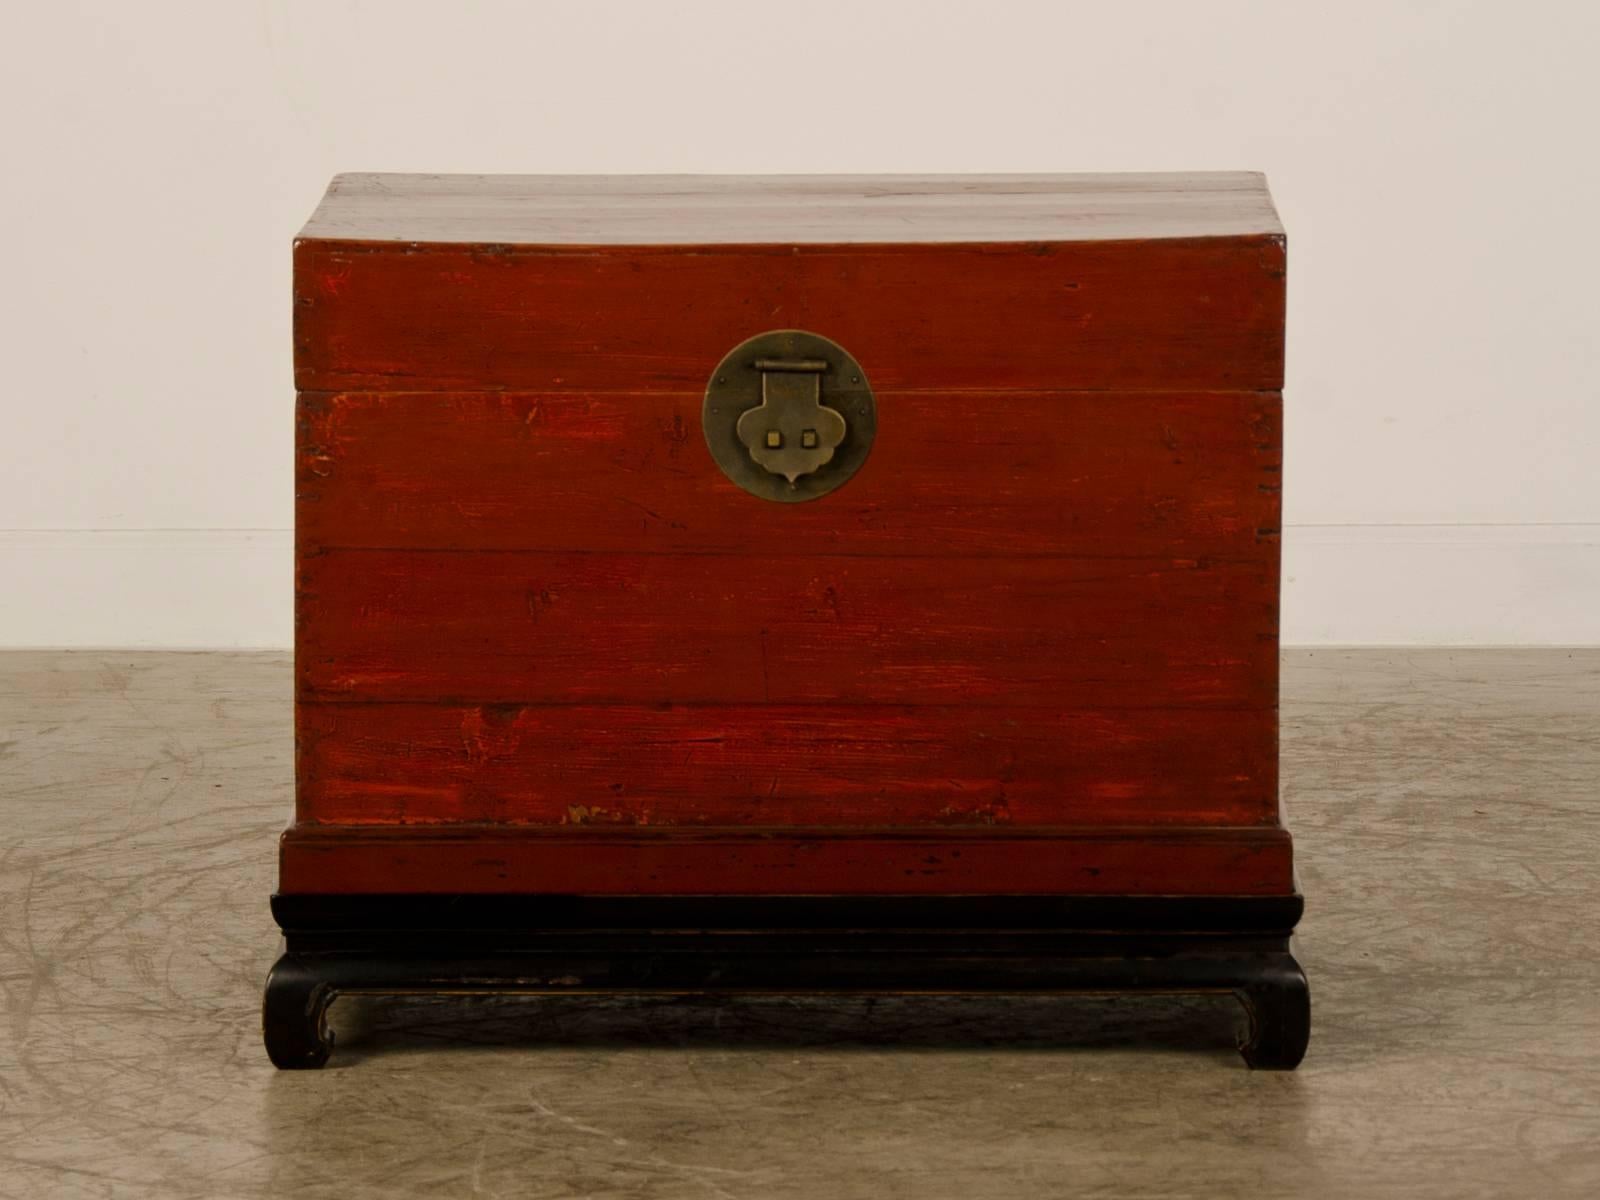 Be the first to see our new listings direct from 1stdibs! Please click Follow below.

A handsome antique Chinese red lacquer trunk from the Kuang Hsu period in China, circa 1875. The trunk as the original metal hardware and is now raised on a